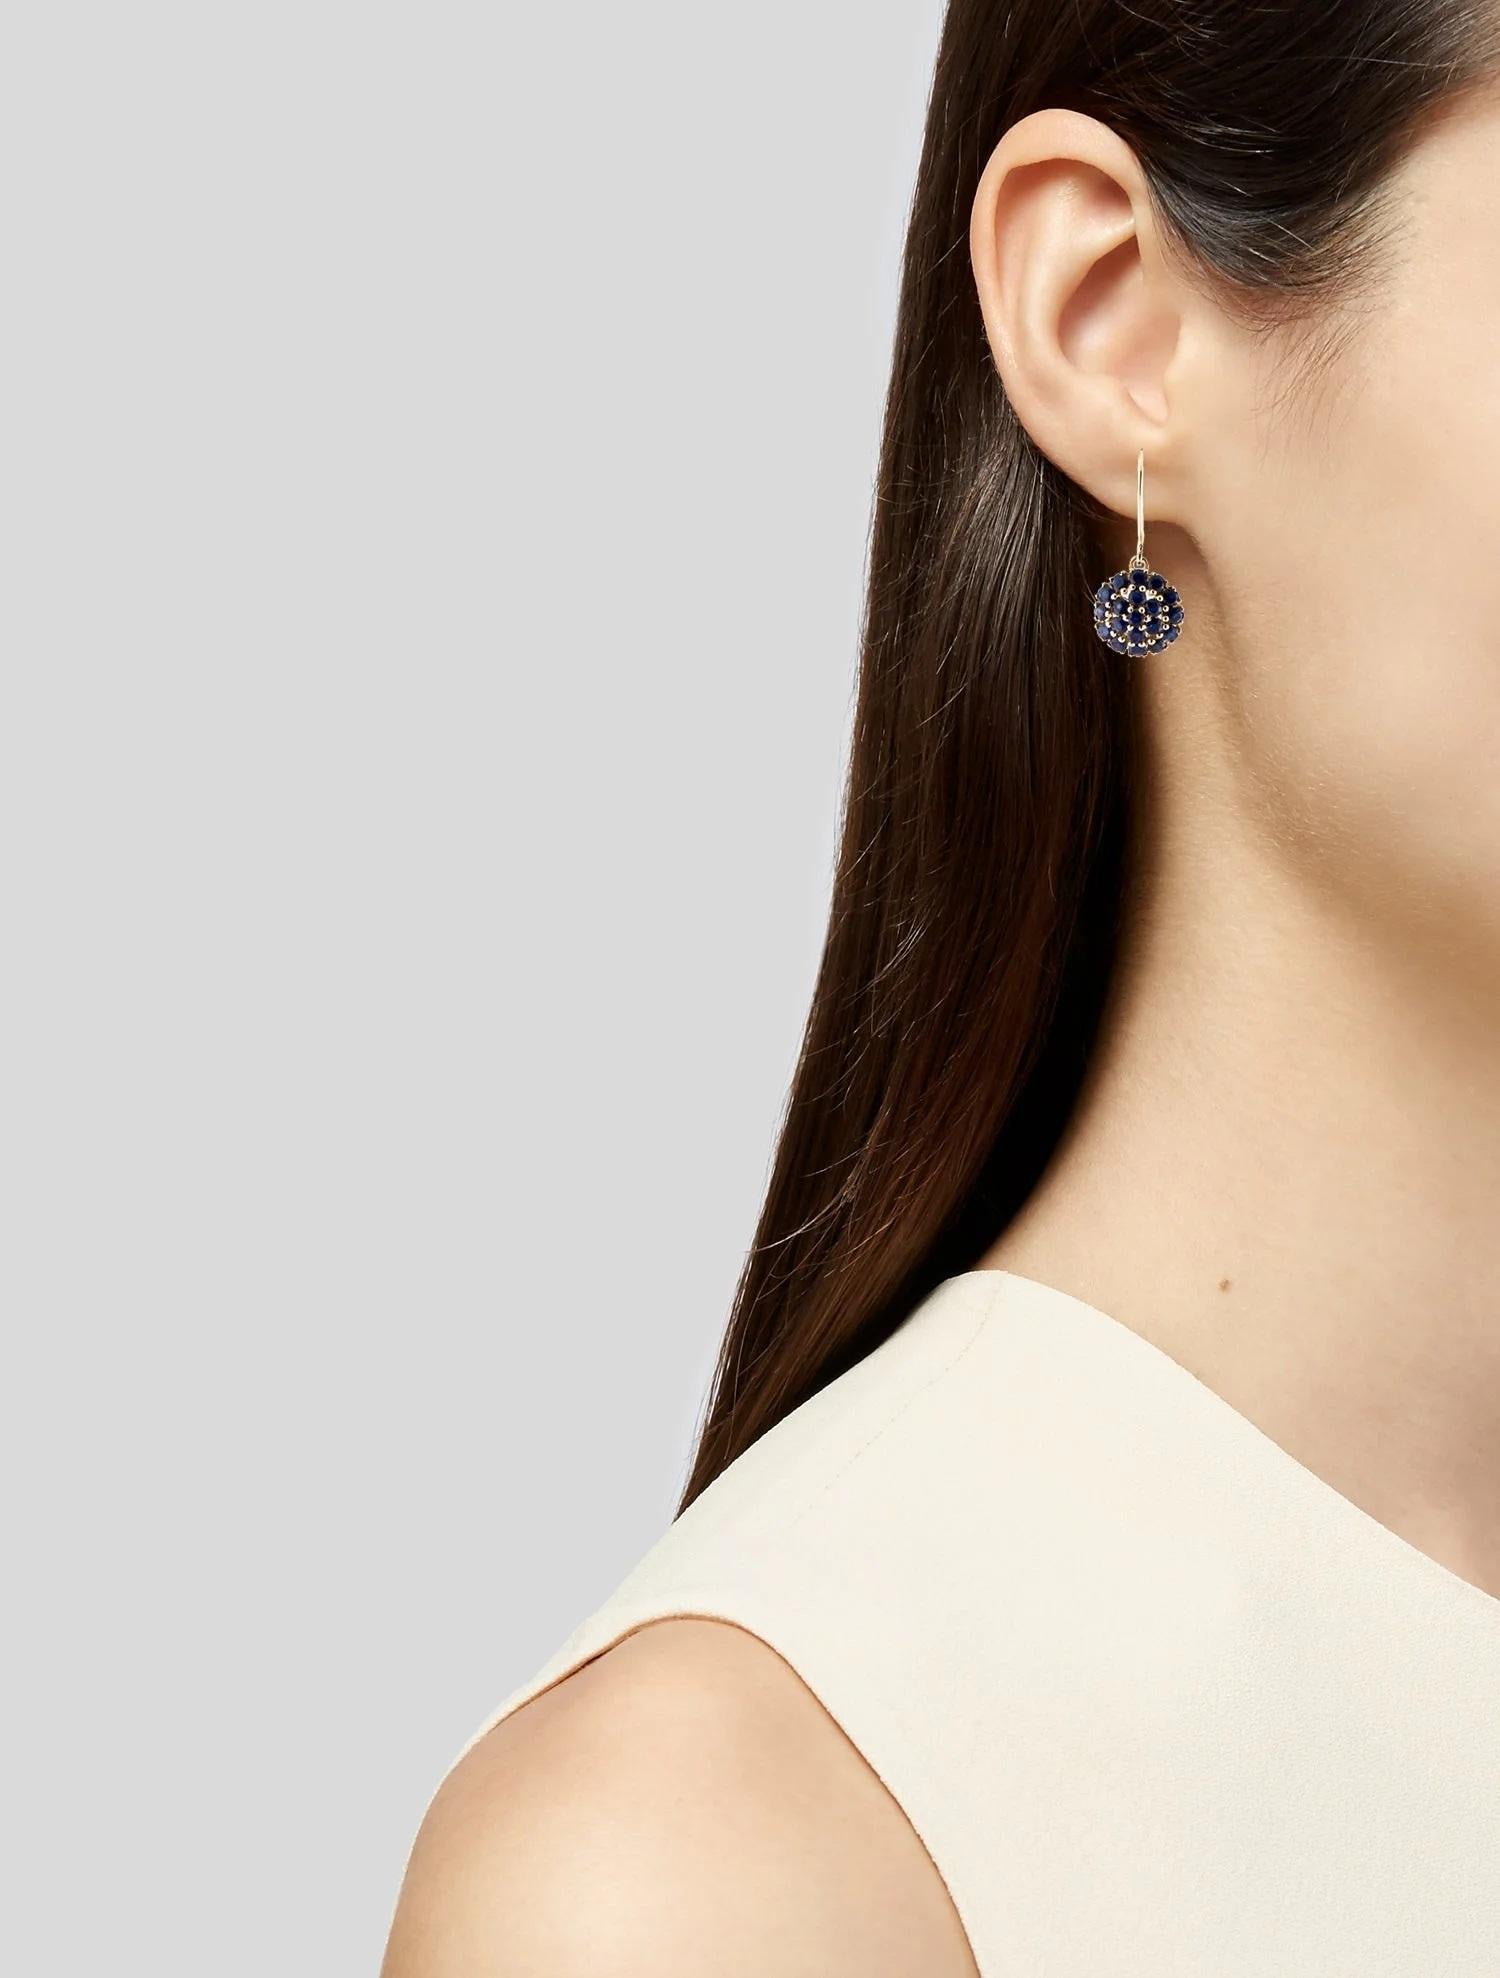 
Enhance your jewelry collection with these stunning 14K yellow gold sapphire drop earrings. Crafted with meticulous attention to detail, each earring features a captivating array of round faceted sapphires, totaling 3.86 carats. The rich blue hue